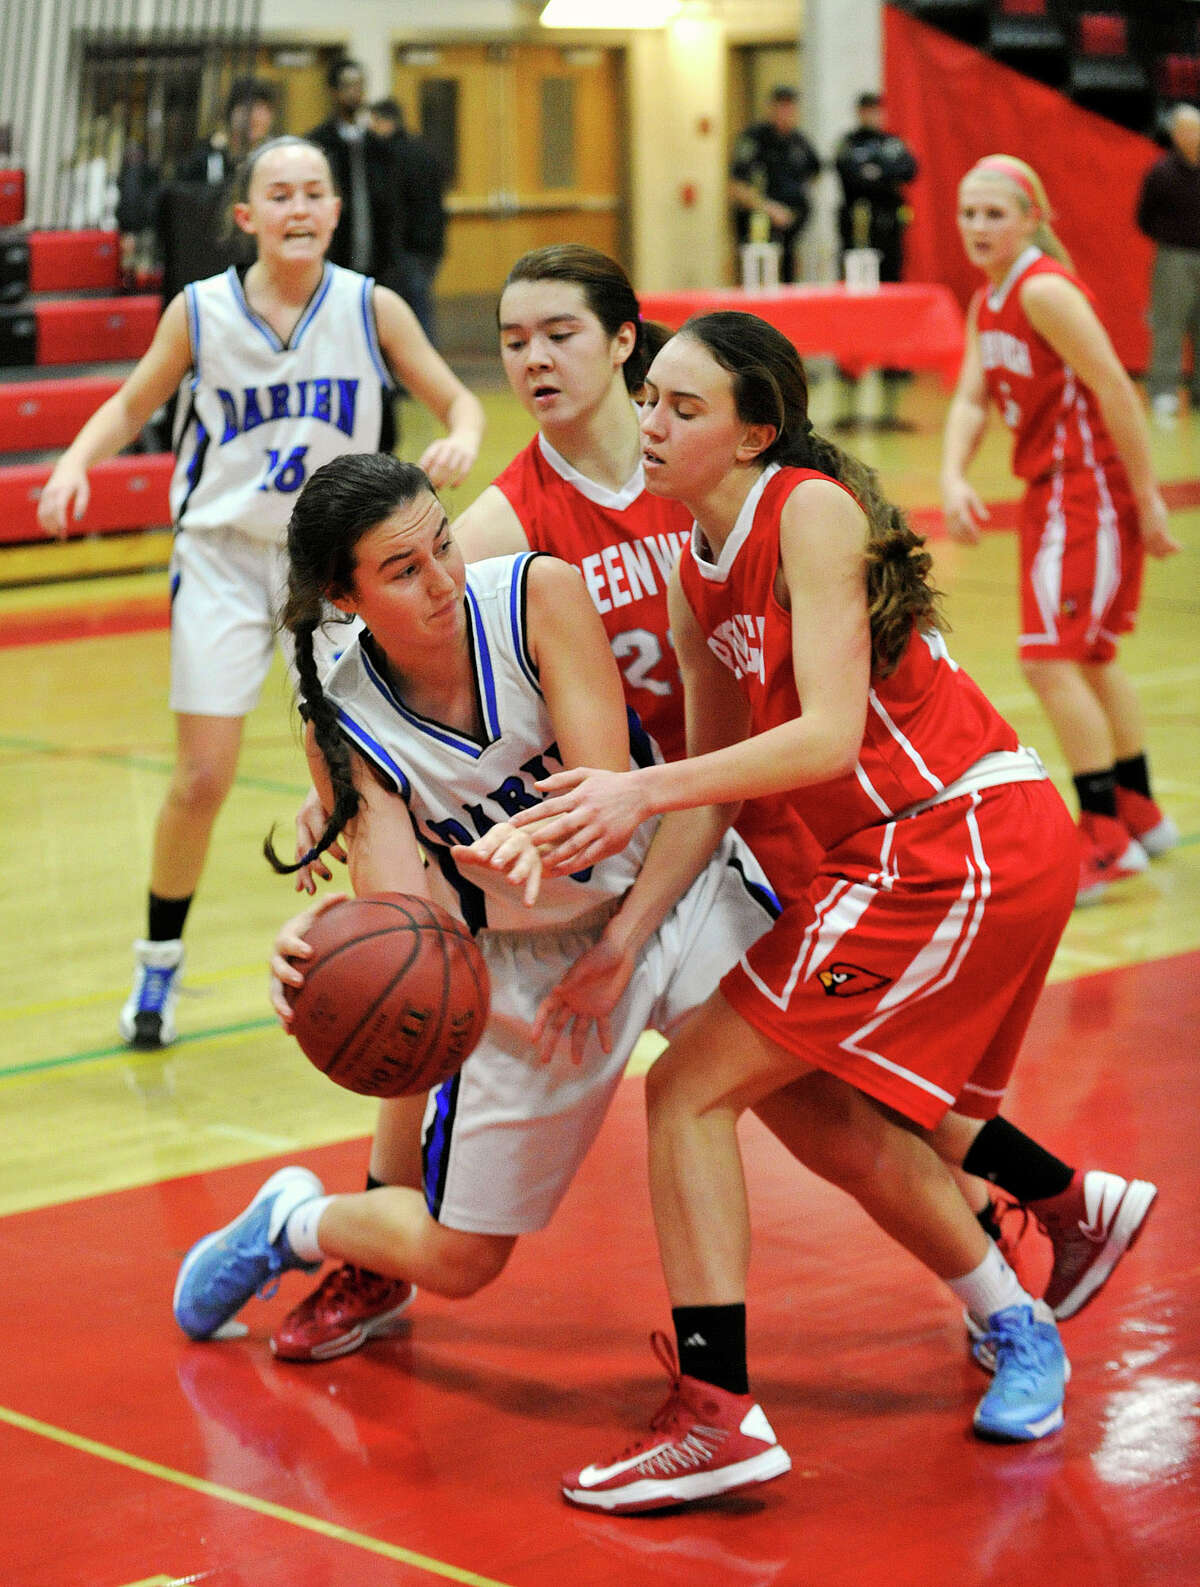 Darien's Kaeleigh Morrill tries to find an open teammate while under pressure from Greenwich's Colleen Bennett, right, and Jamie Kockenmeister during the championship final of the 19th annual Tony LaVista Basketball Tournament at New Canaan High School in New Canaan, Conn., on Monday, Dec. 30, 2013. Greenwich won 66-36.